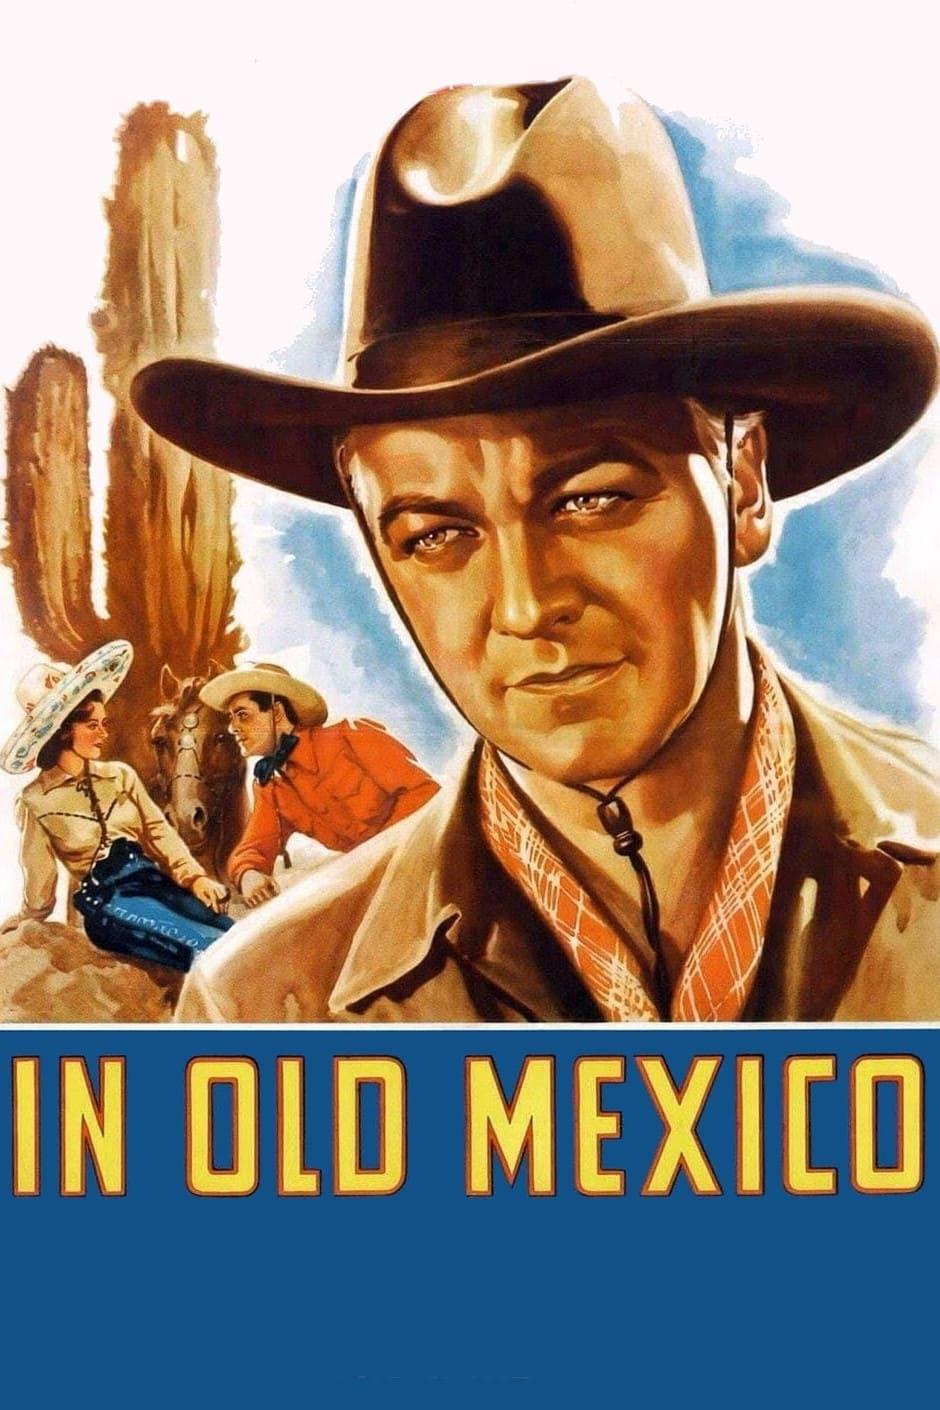 In Old Mexico poster